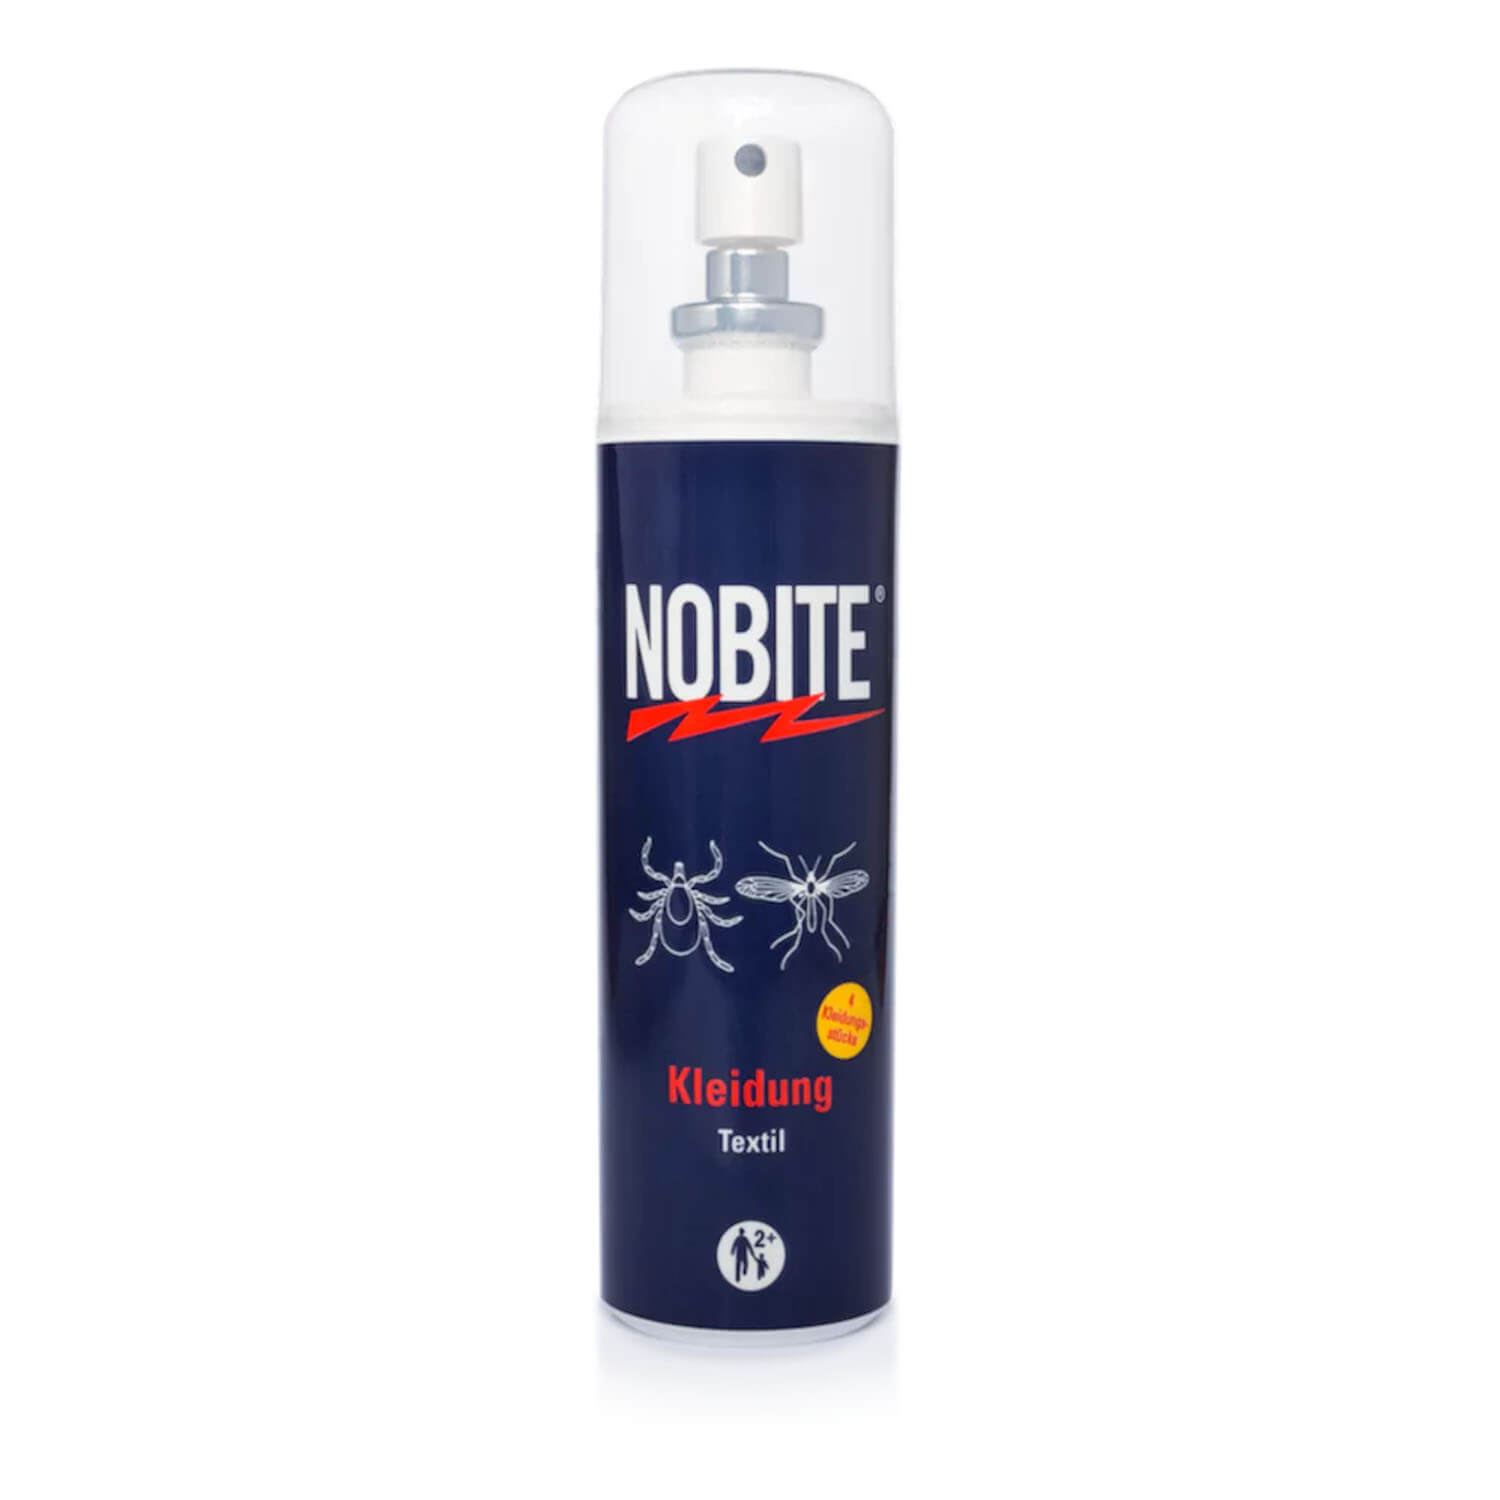 Nobite insect protection spray 100ml - Insect Protection